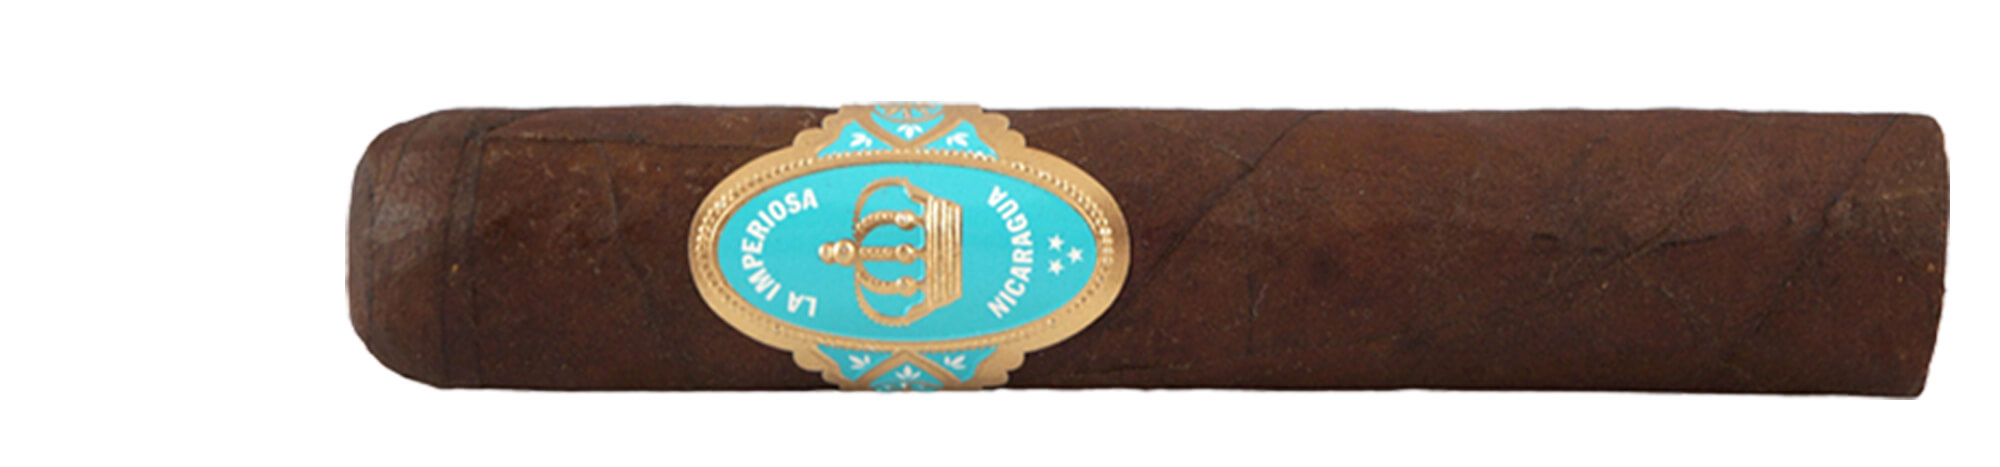 The Crowned Heads La Imperiosa